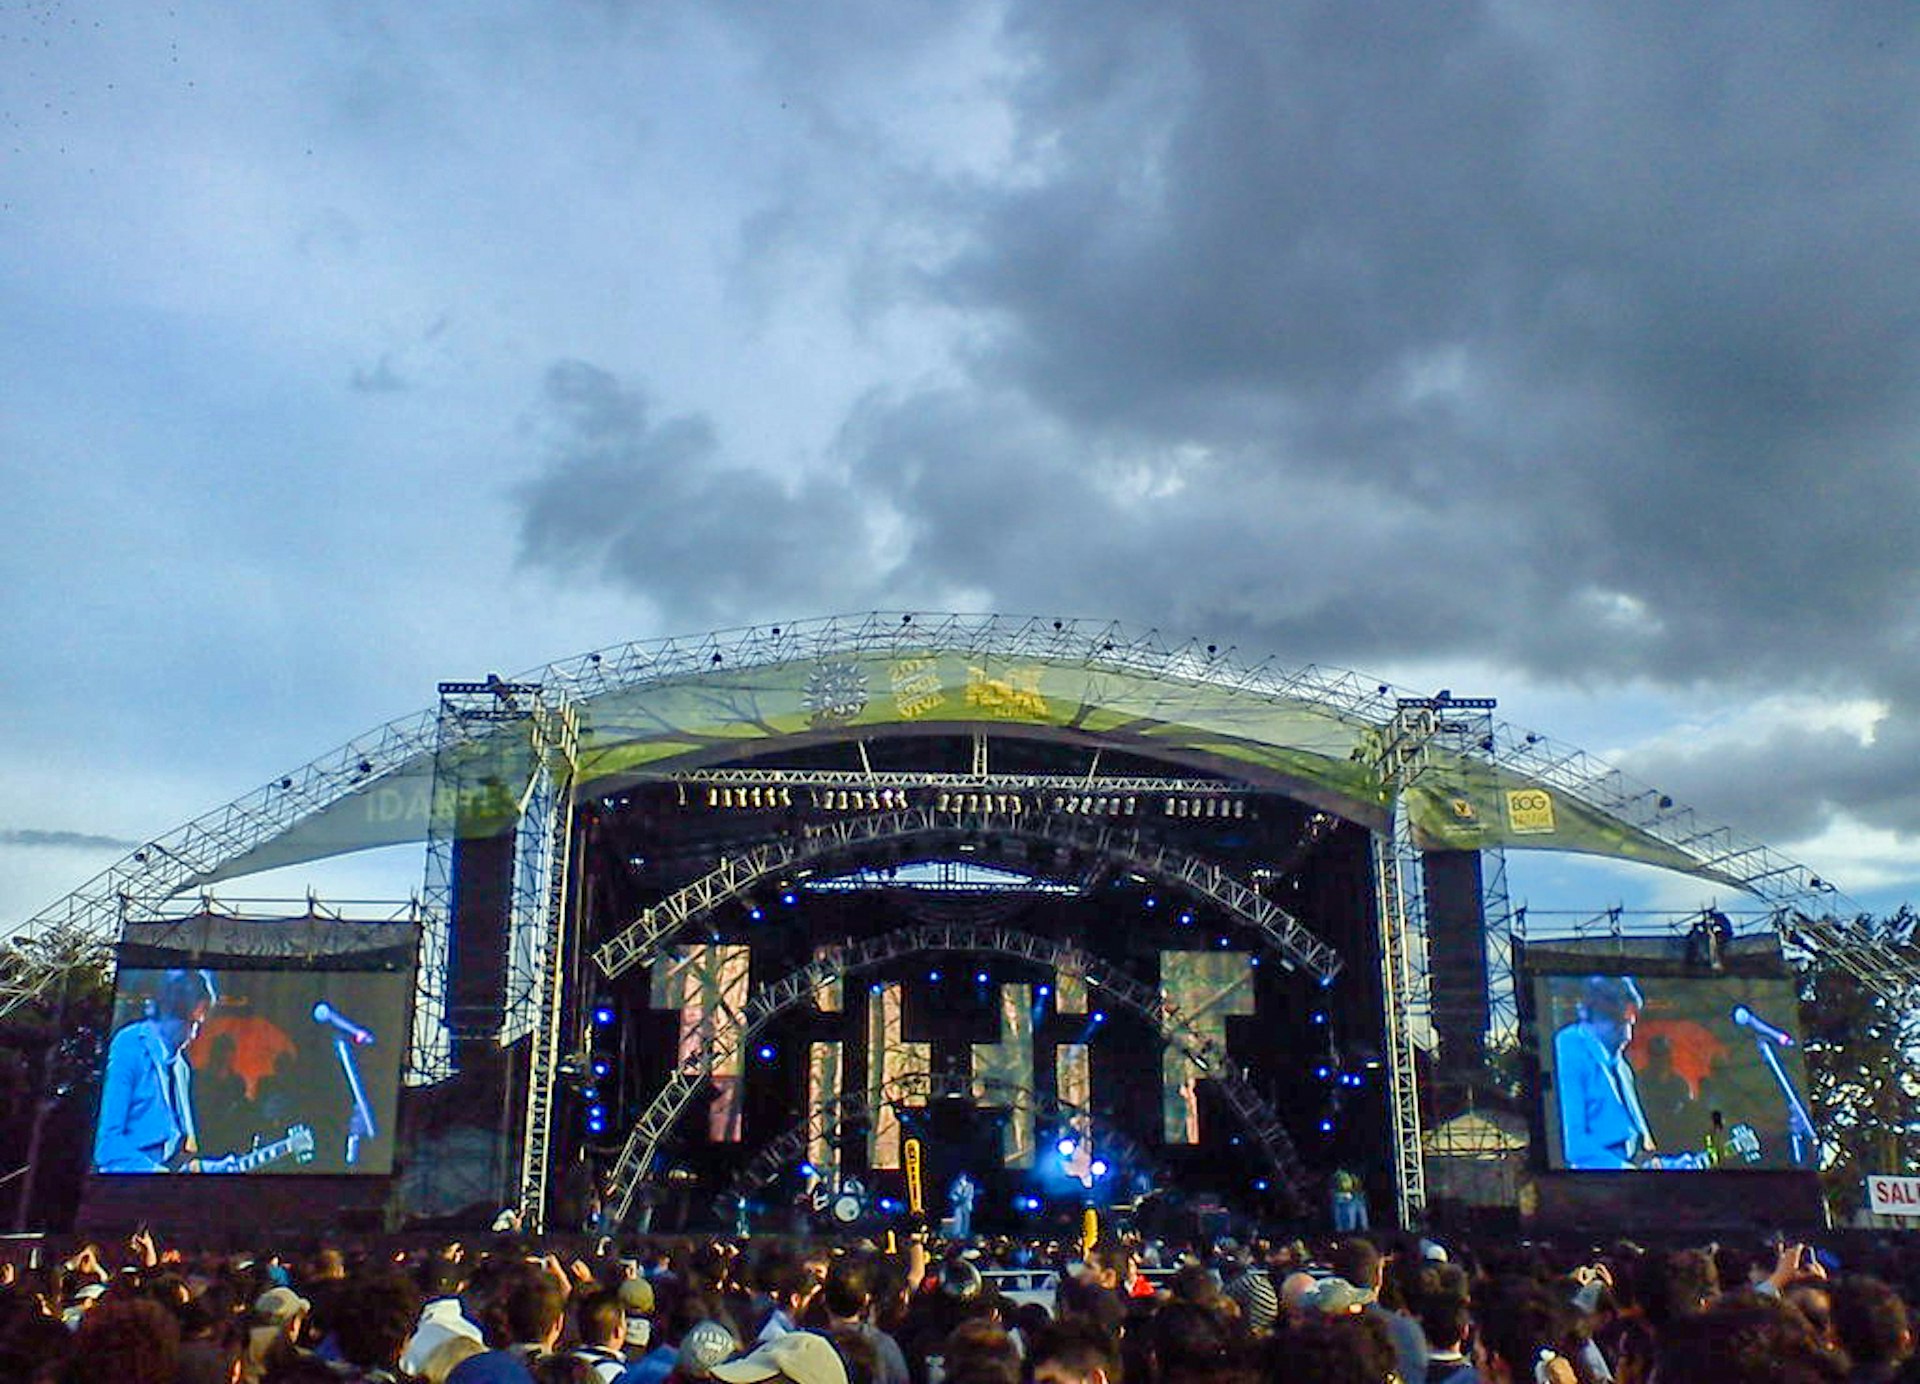 A shot of a music stage with a crowd in the foreground © andrés osorio / CC by 2.0